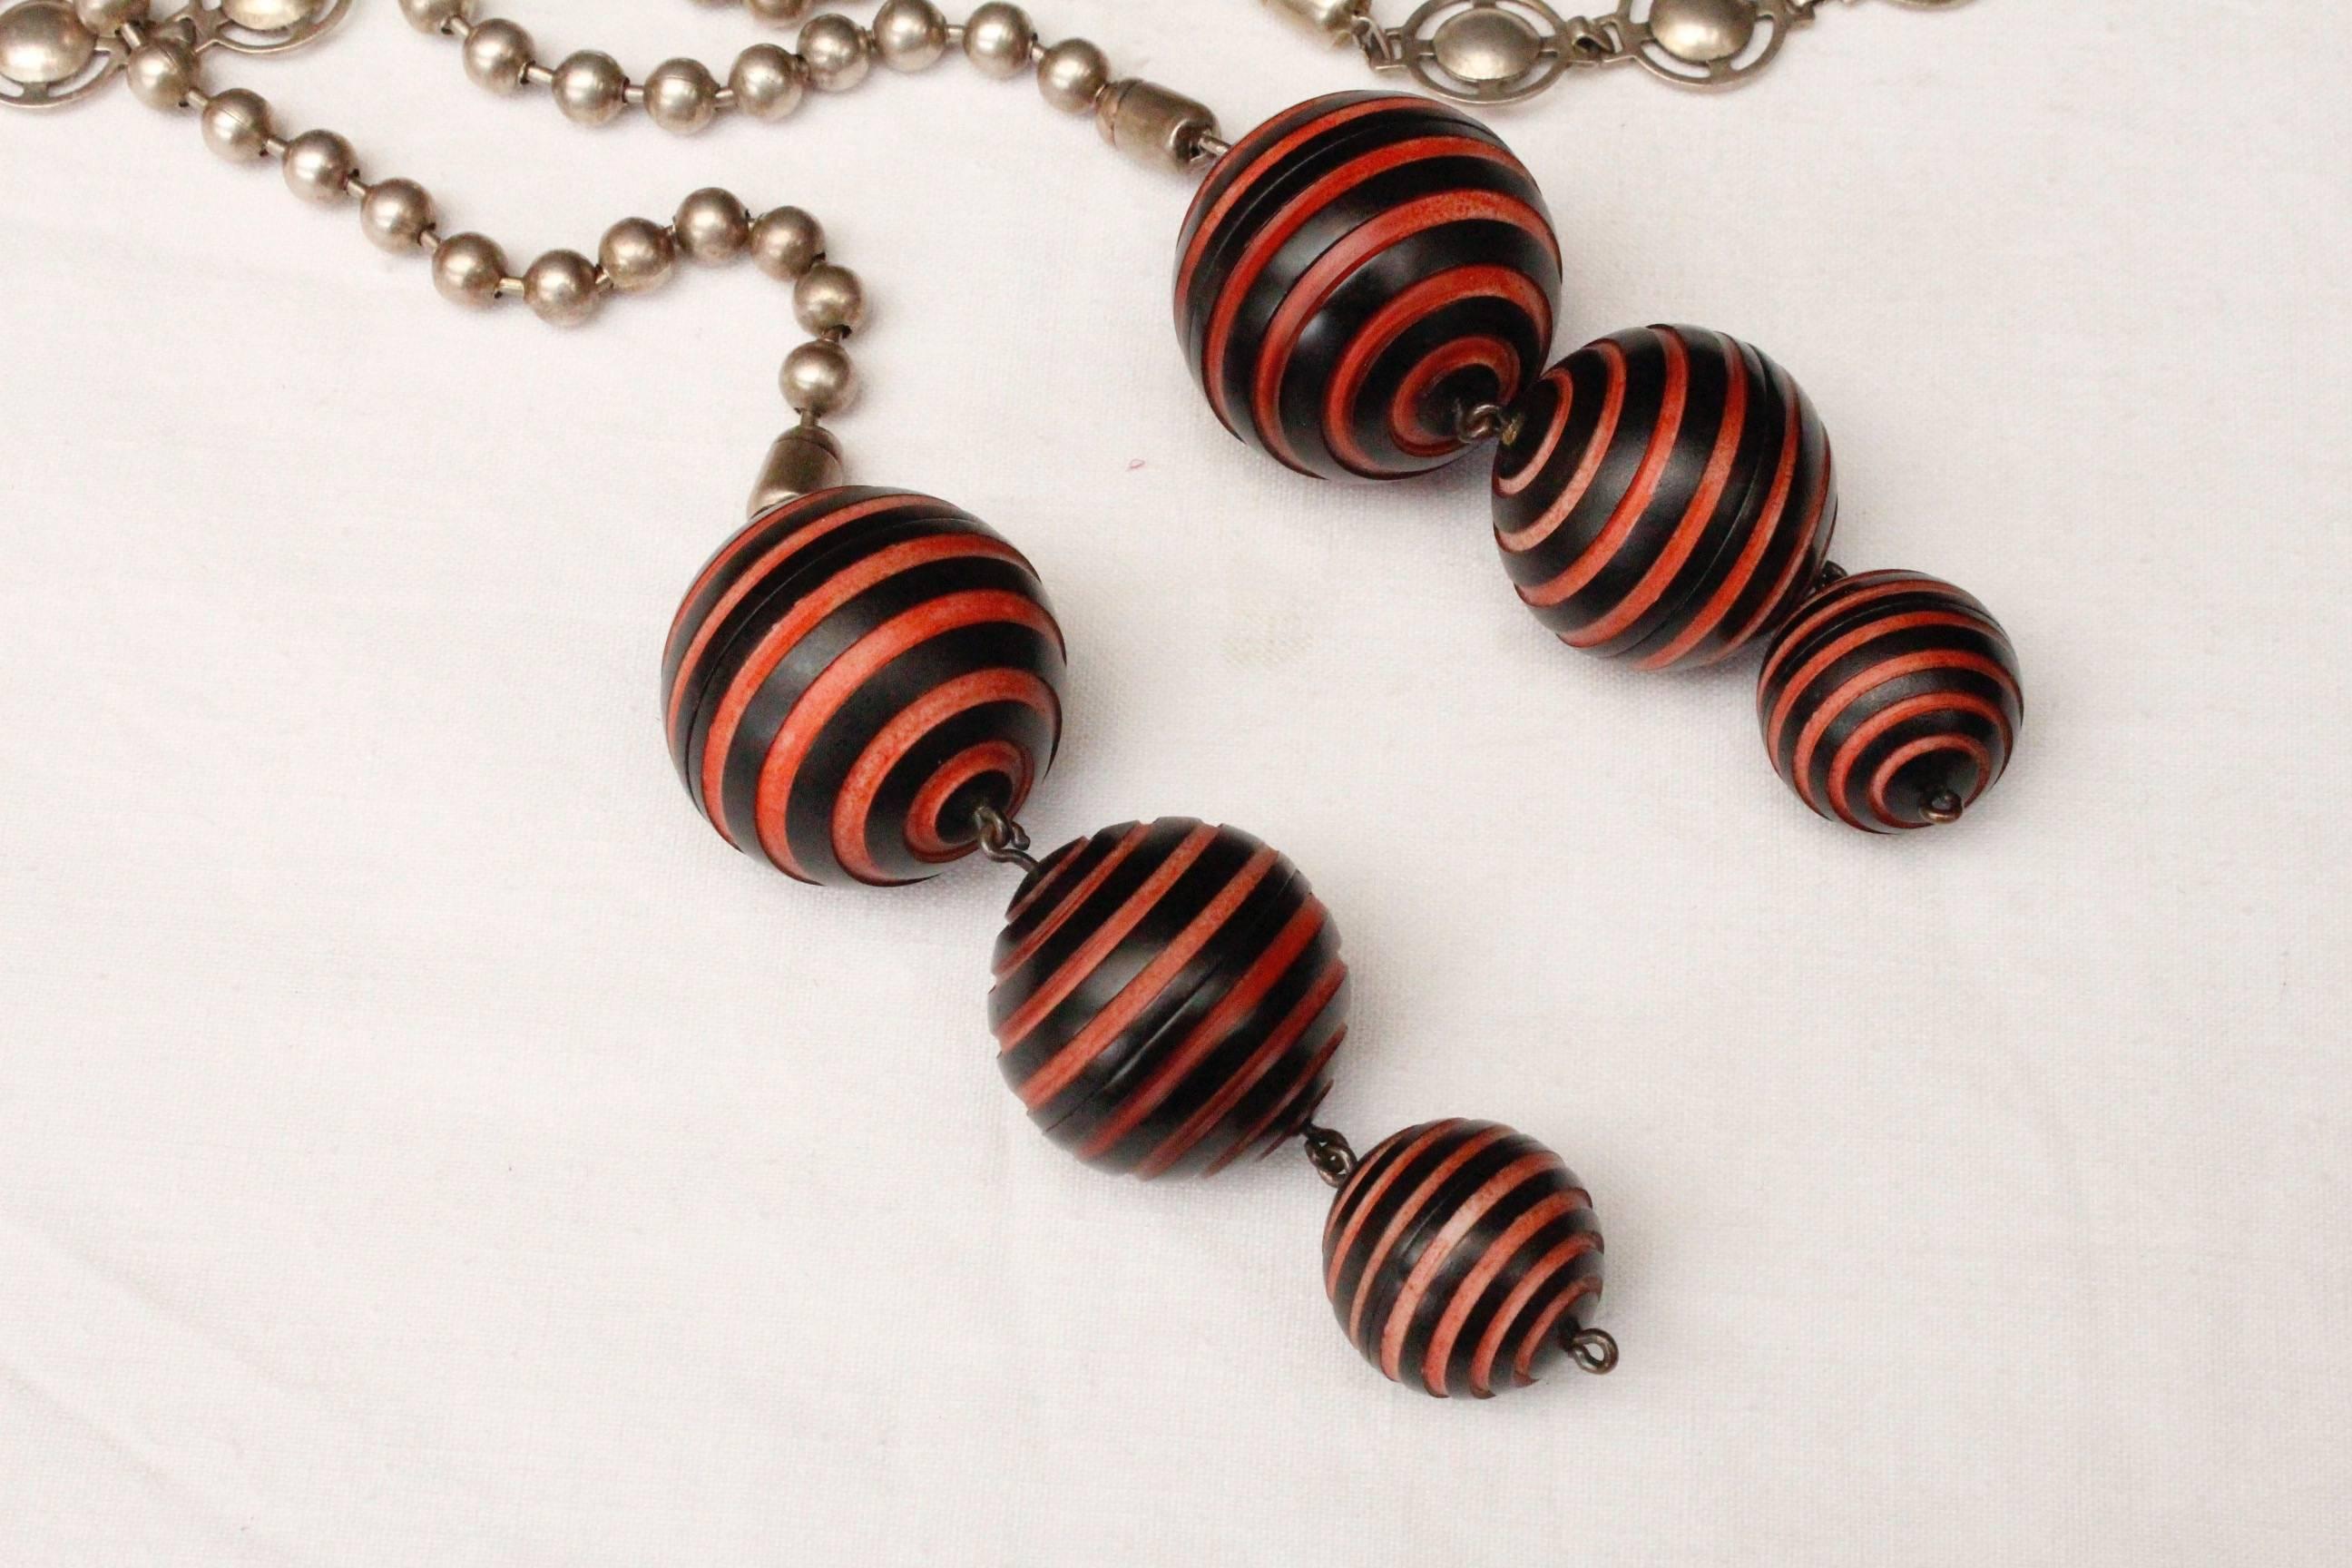 1990s, Jean-Paul Gaultier long tie-necklace with black and orange spheres For Sale 2